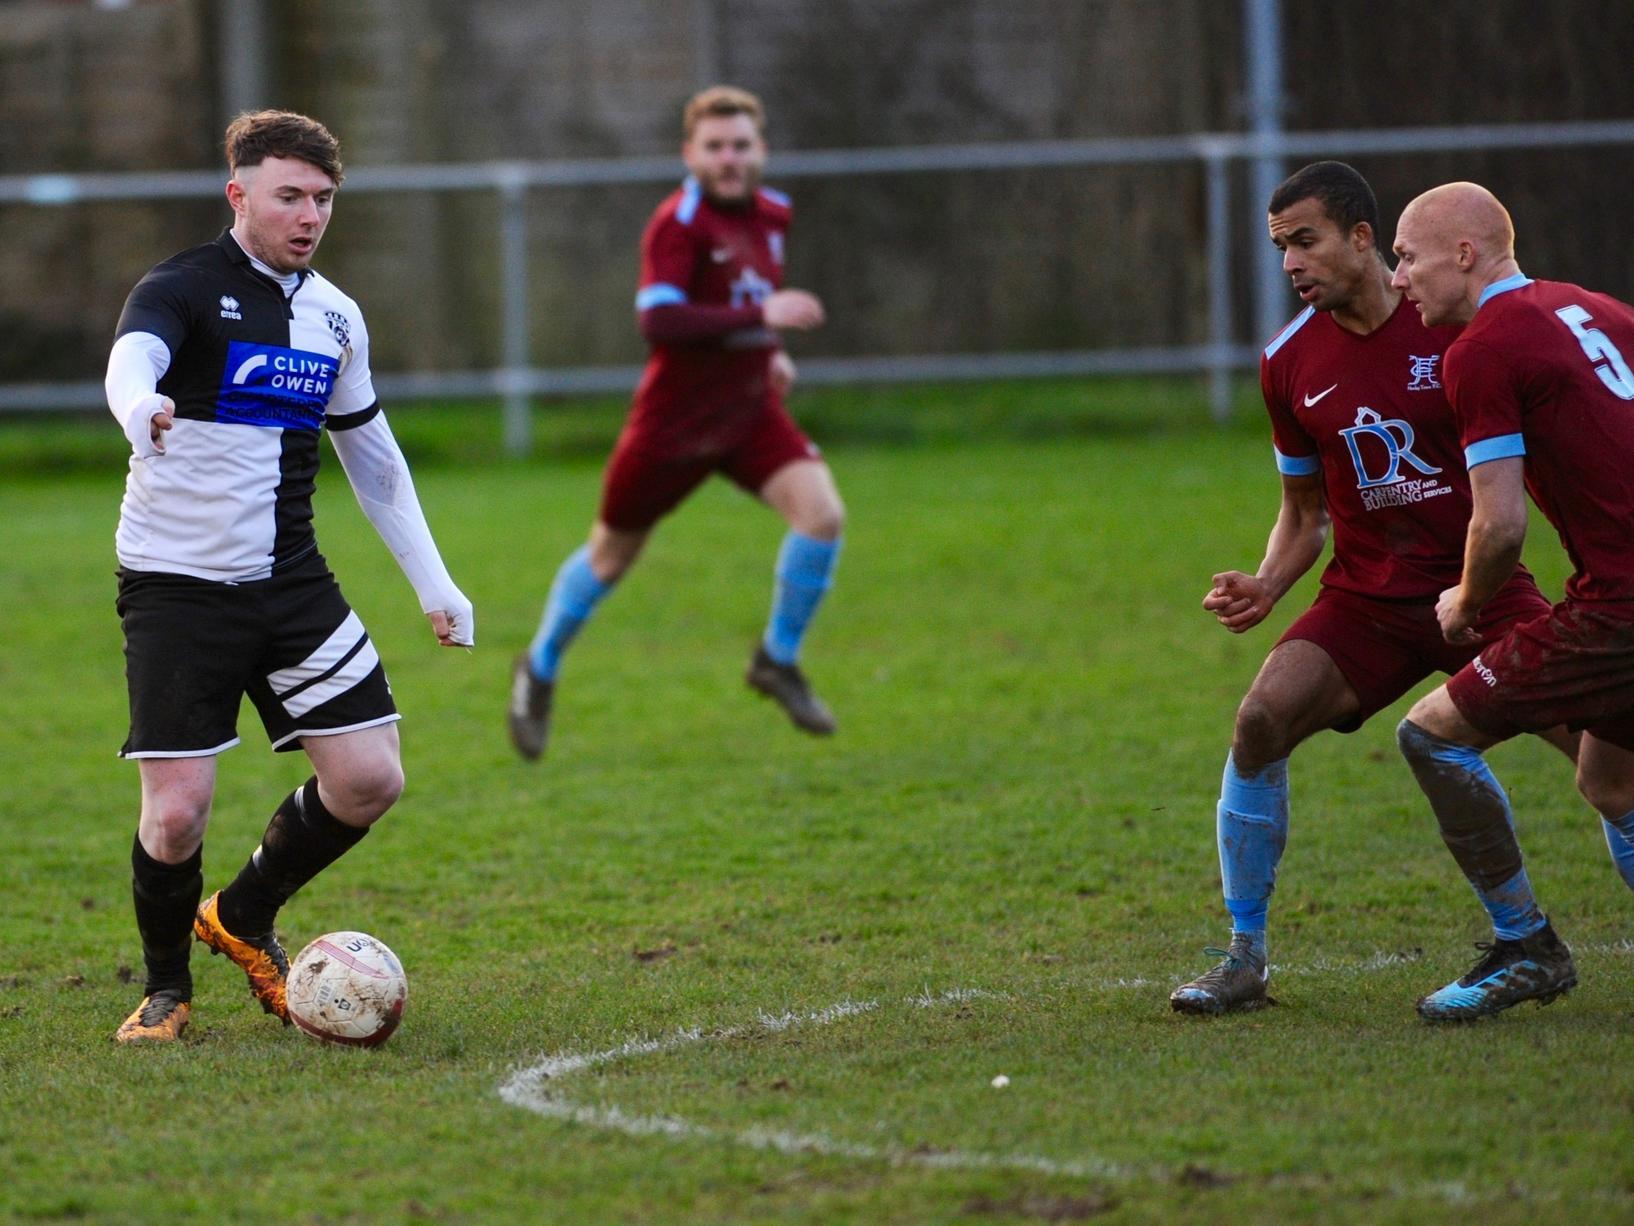 Action from East Preston v Horley Town